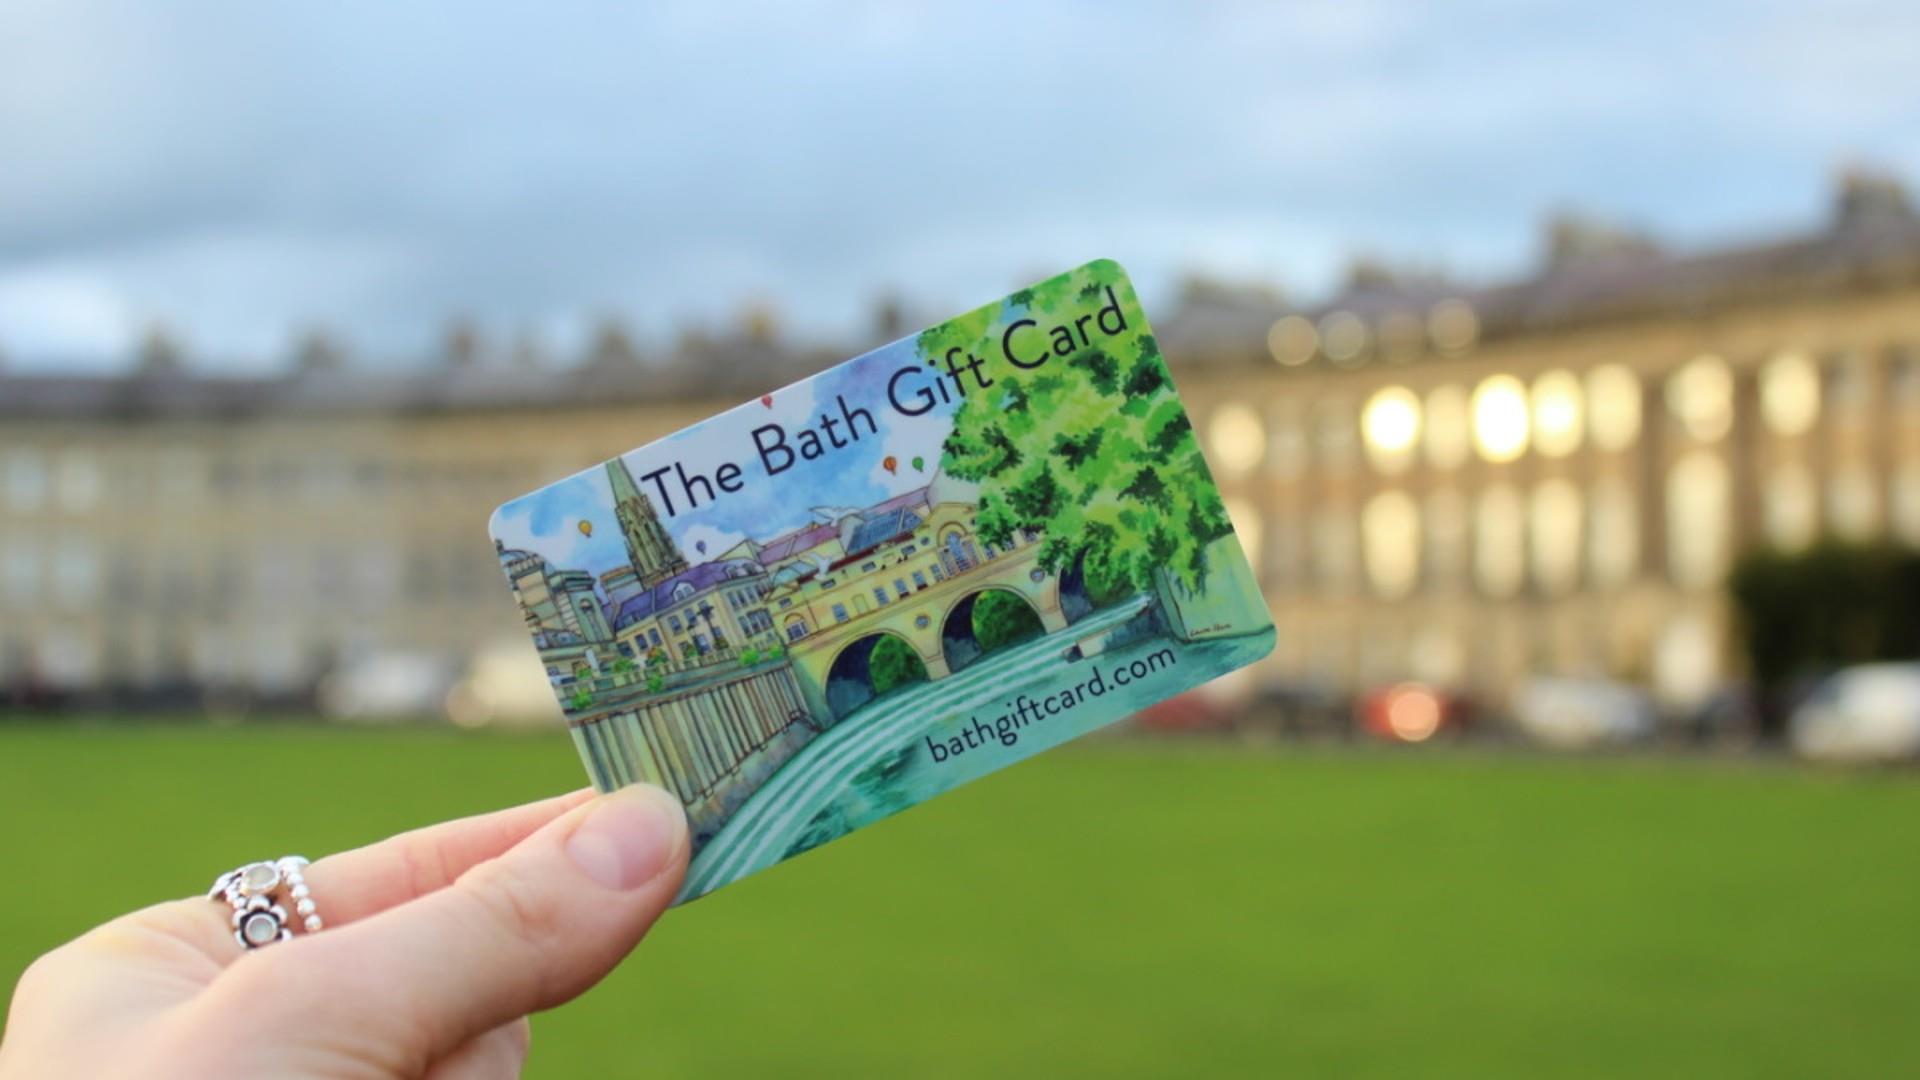 The Bath Gift Card held up in front of Royal Crescent